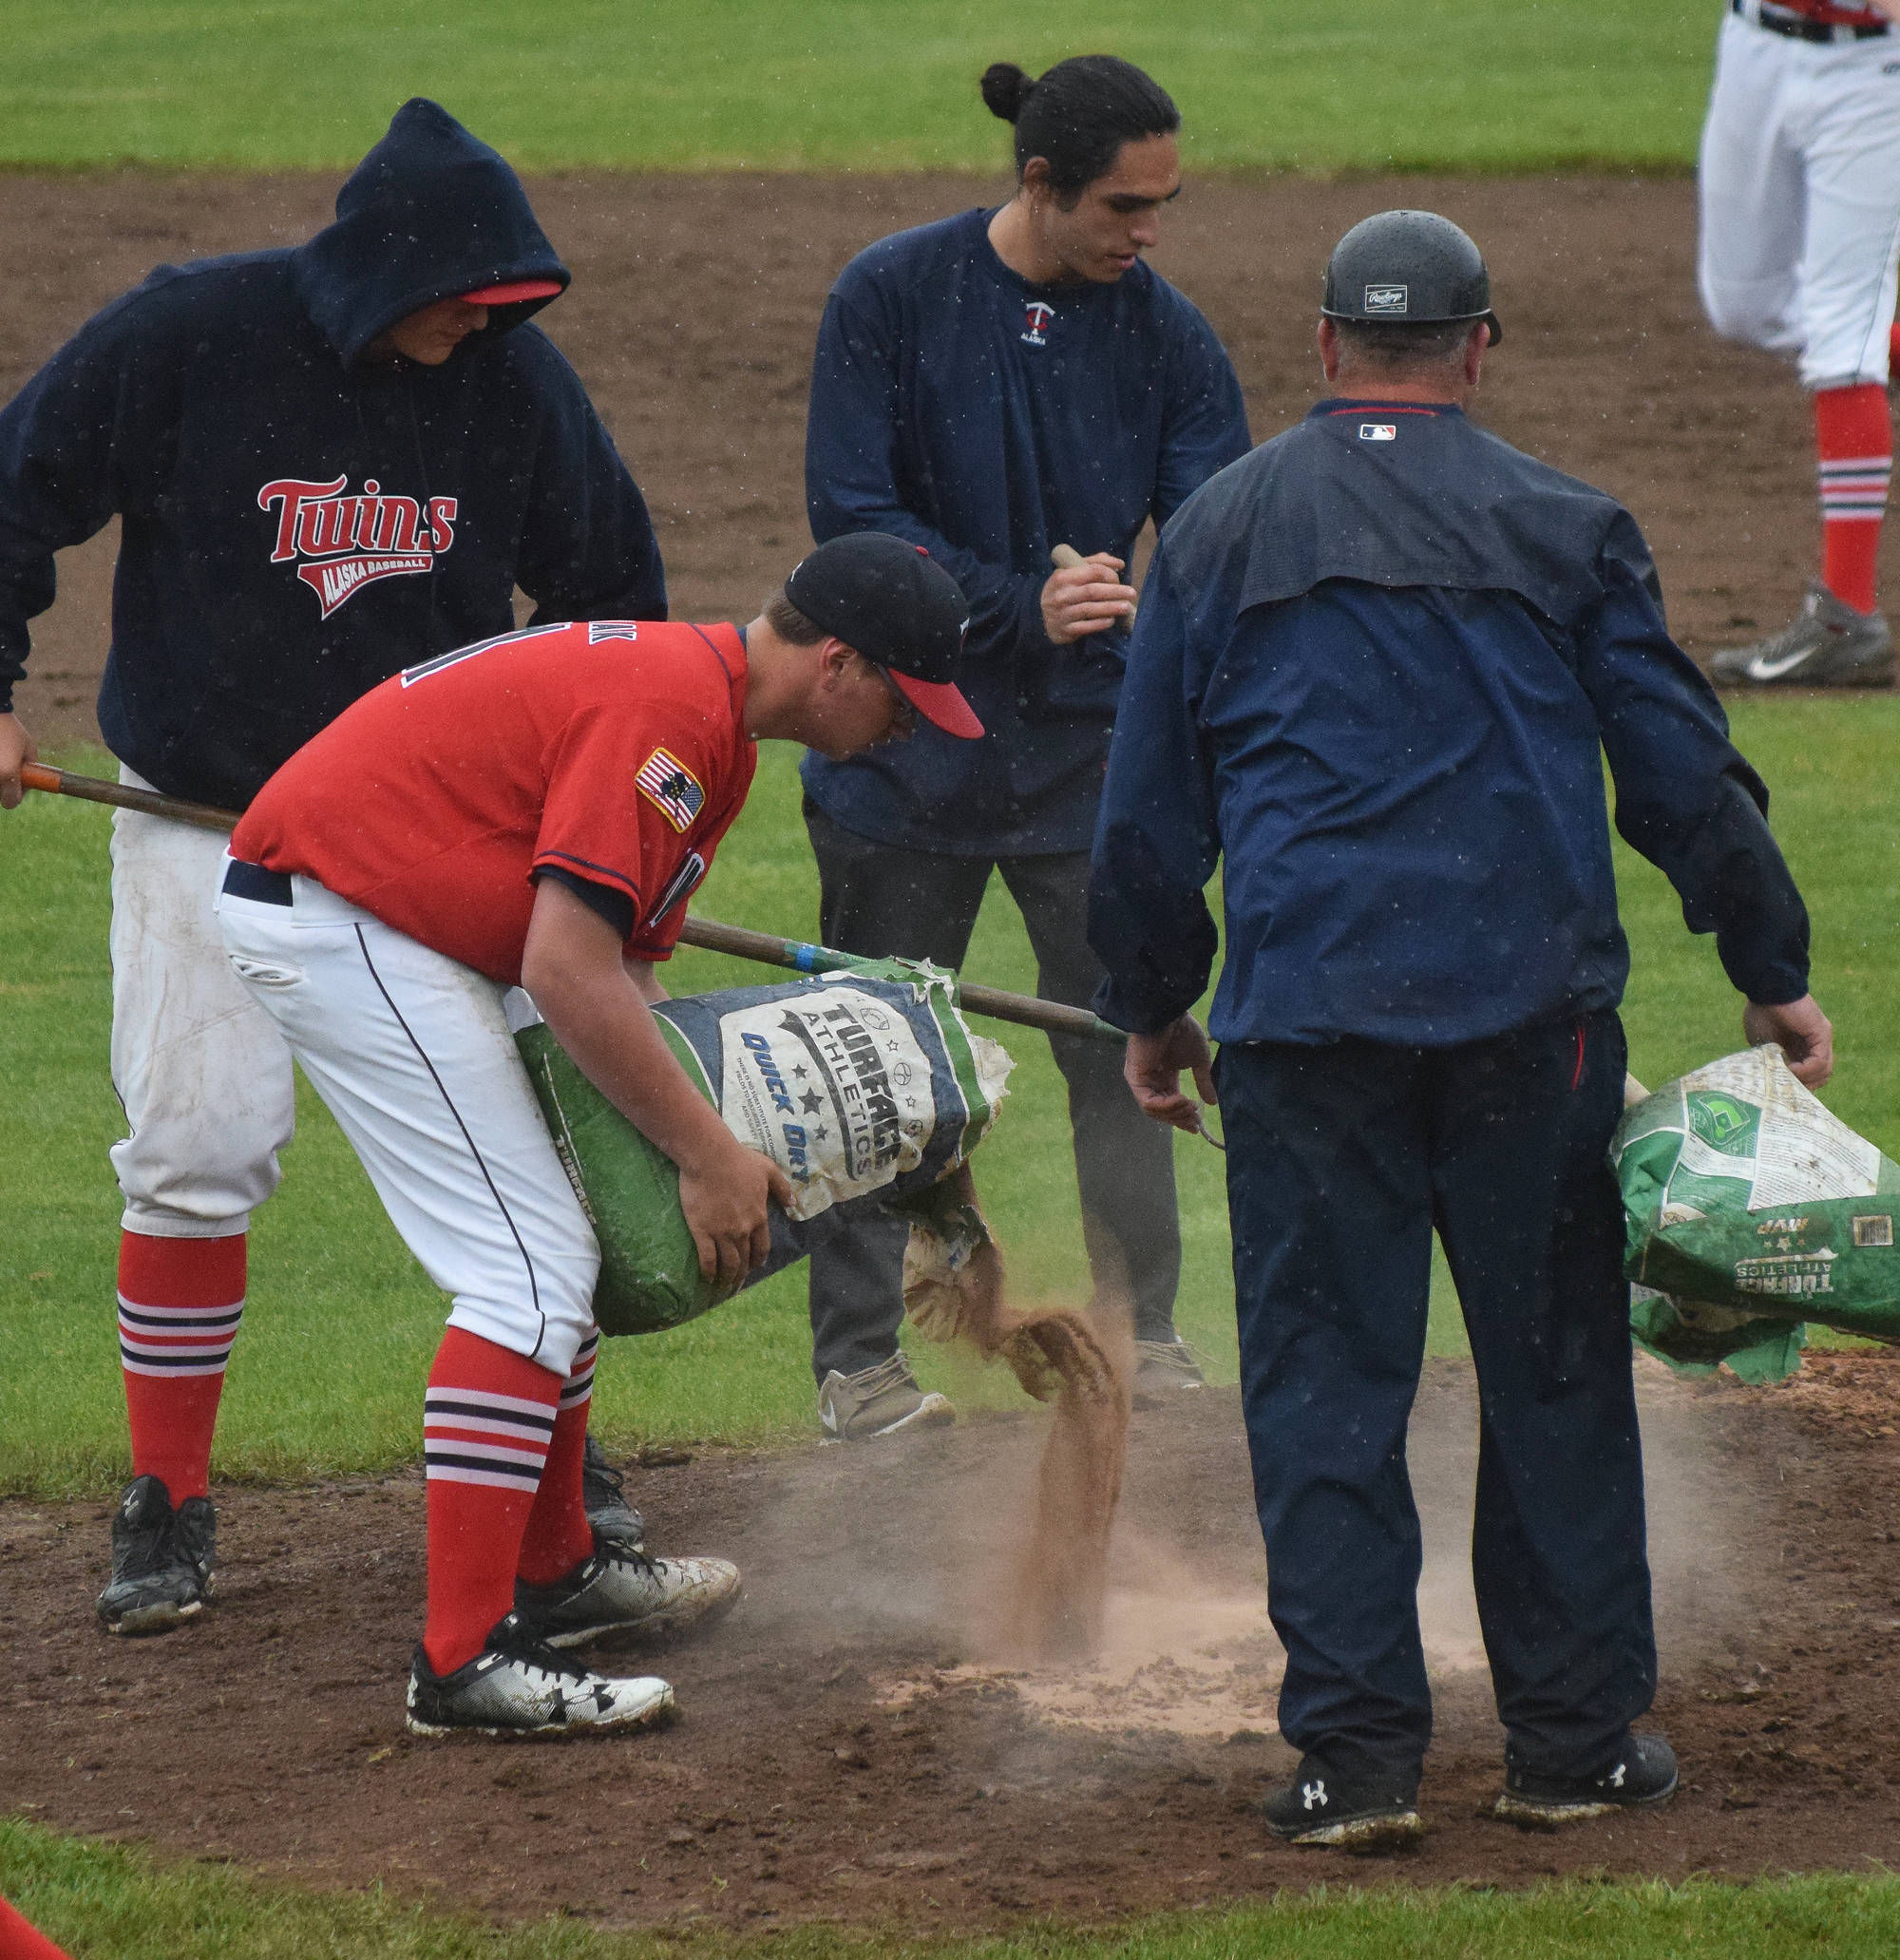 Twins players and coaches drop quick dry soil on the mound at Coral Seymour Memorial Ballpark, on a wet Friday afternoon in Kenai. (Photo by Joey Klecka/Peninsula Clarion)